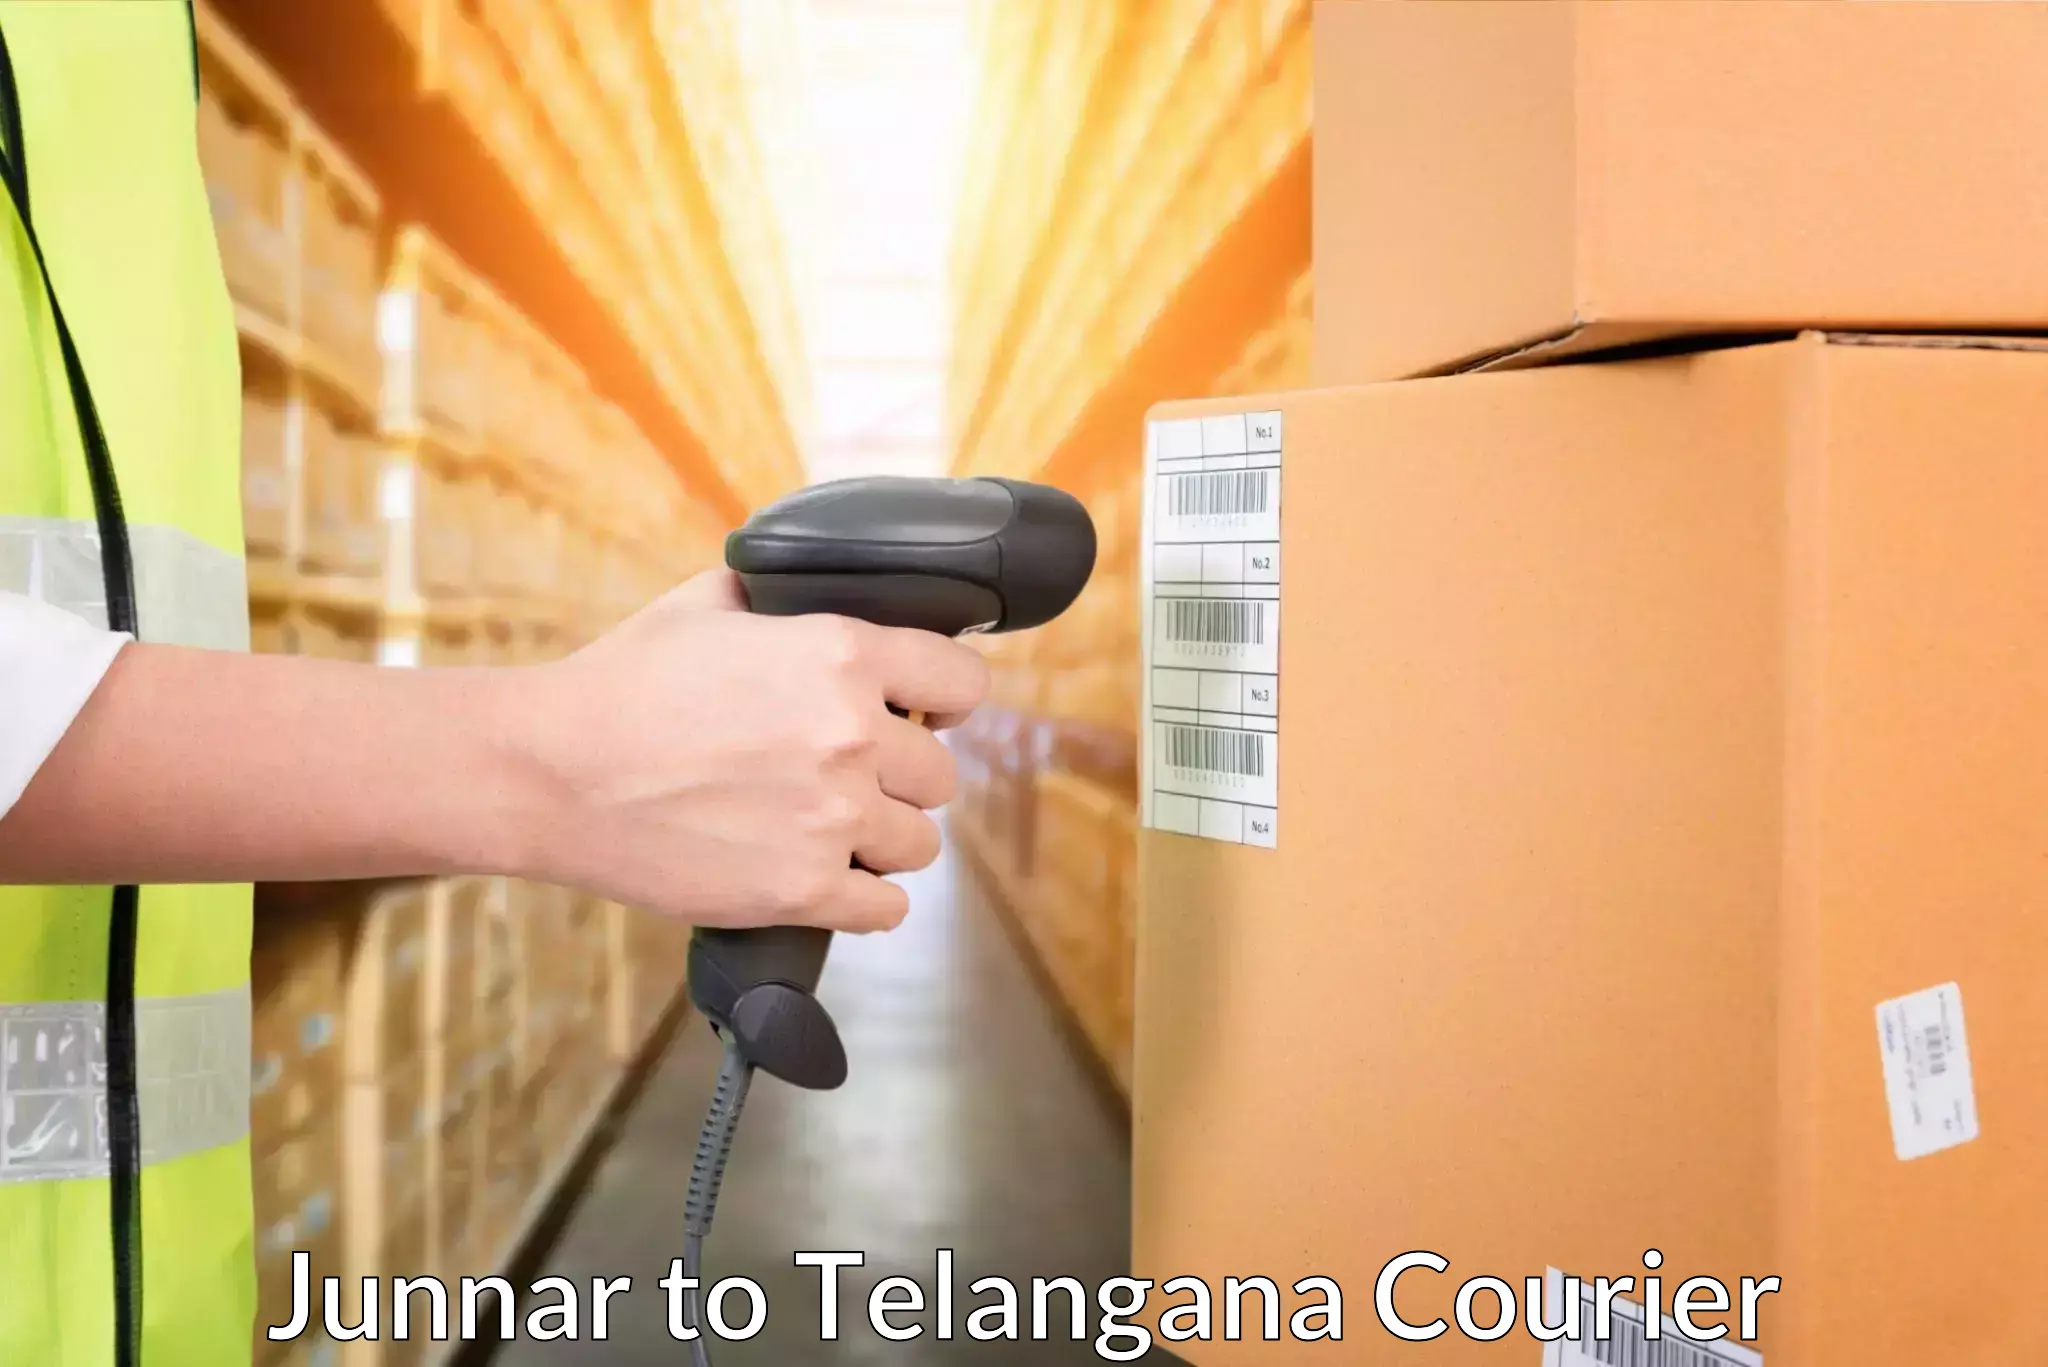 Full-service courier options Junnar to Bodhan